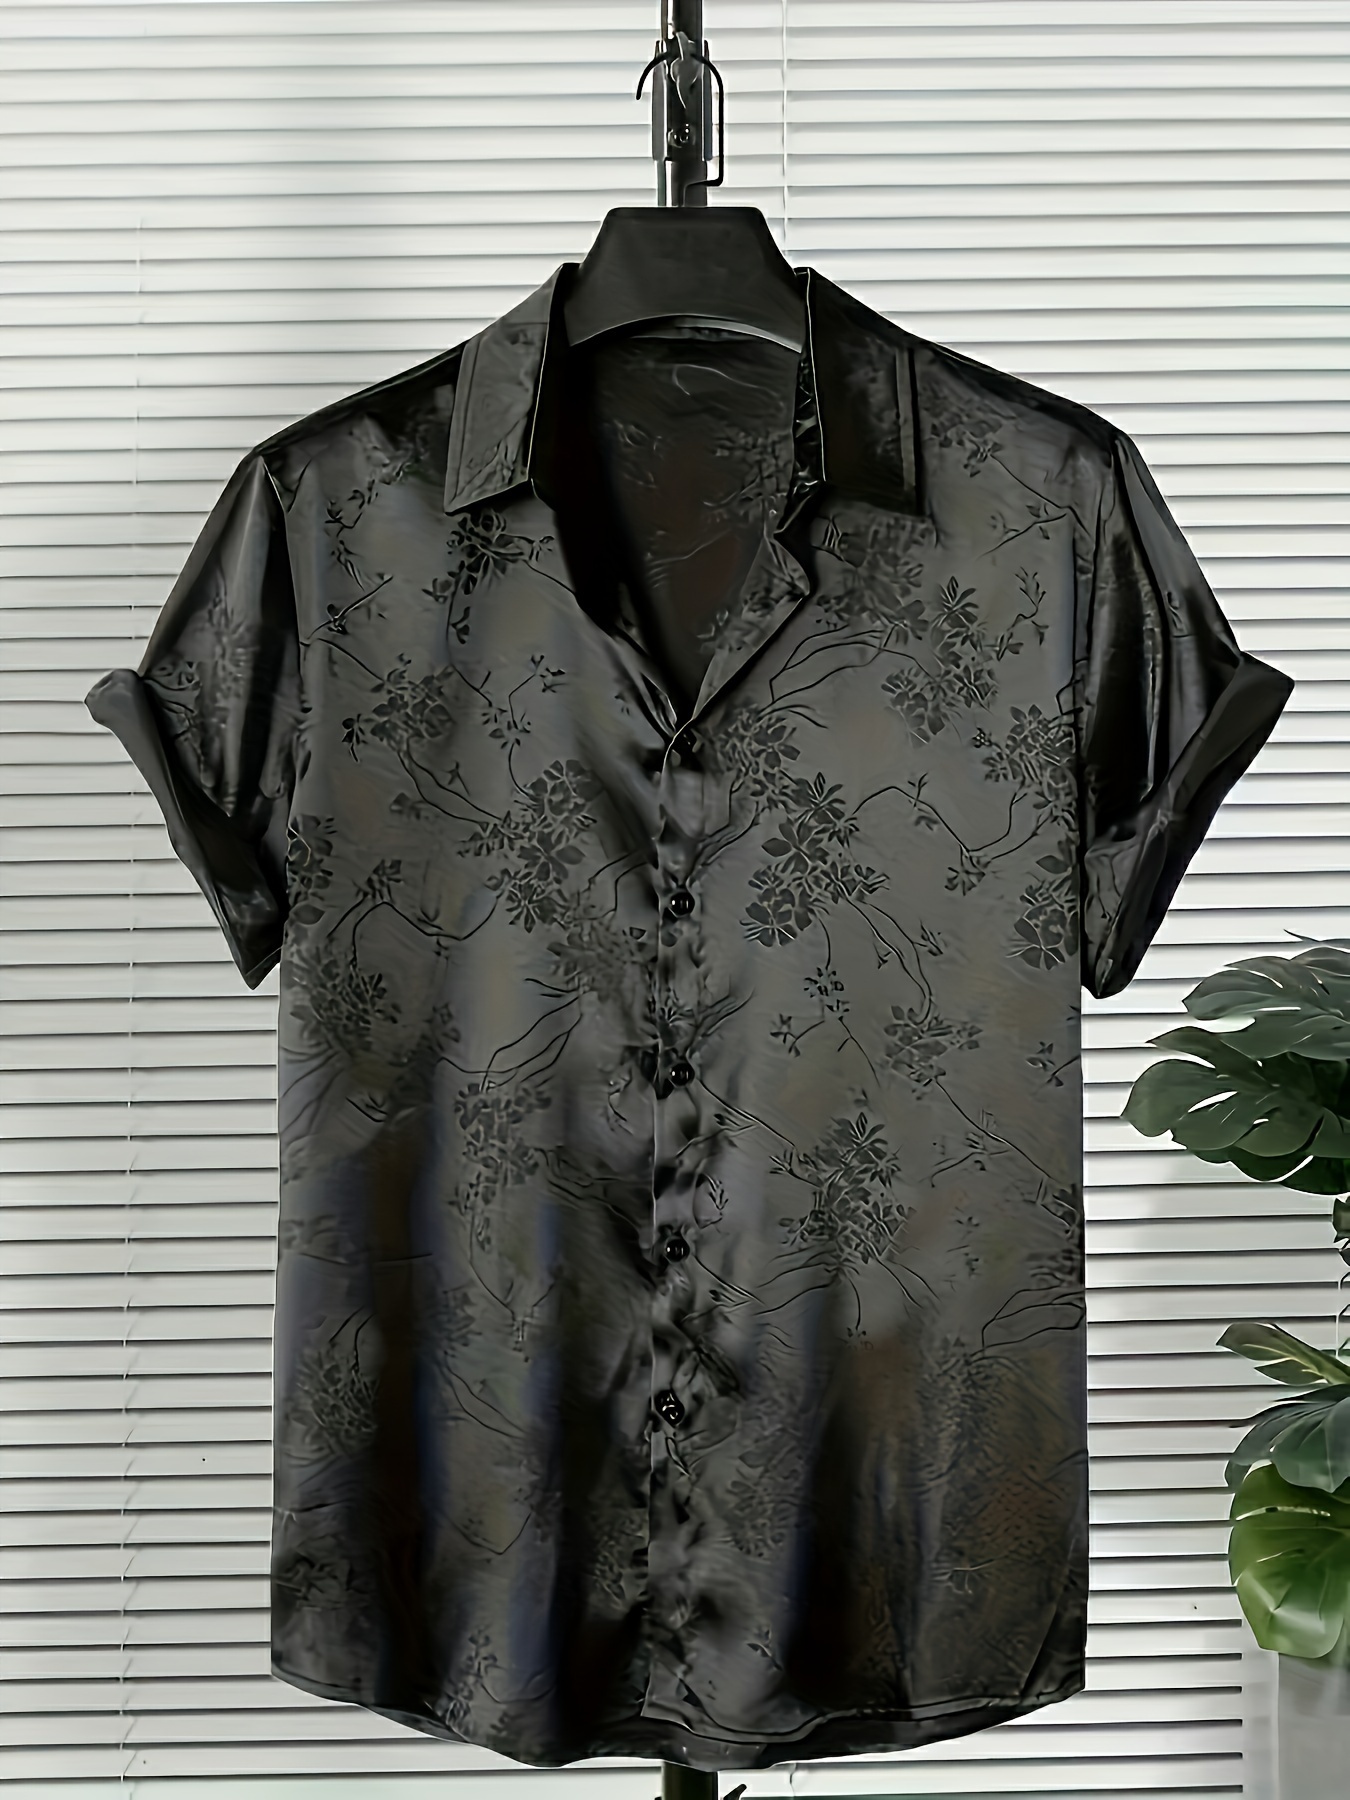 Men's Casual Short Sleeve Flower Print Shirt - Perfect for Summer Vacation and Resort - Great Gift for Men